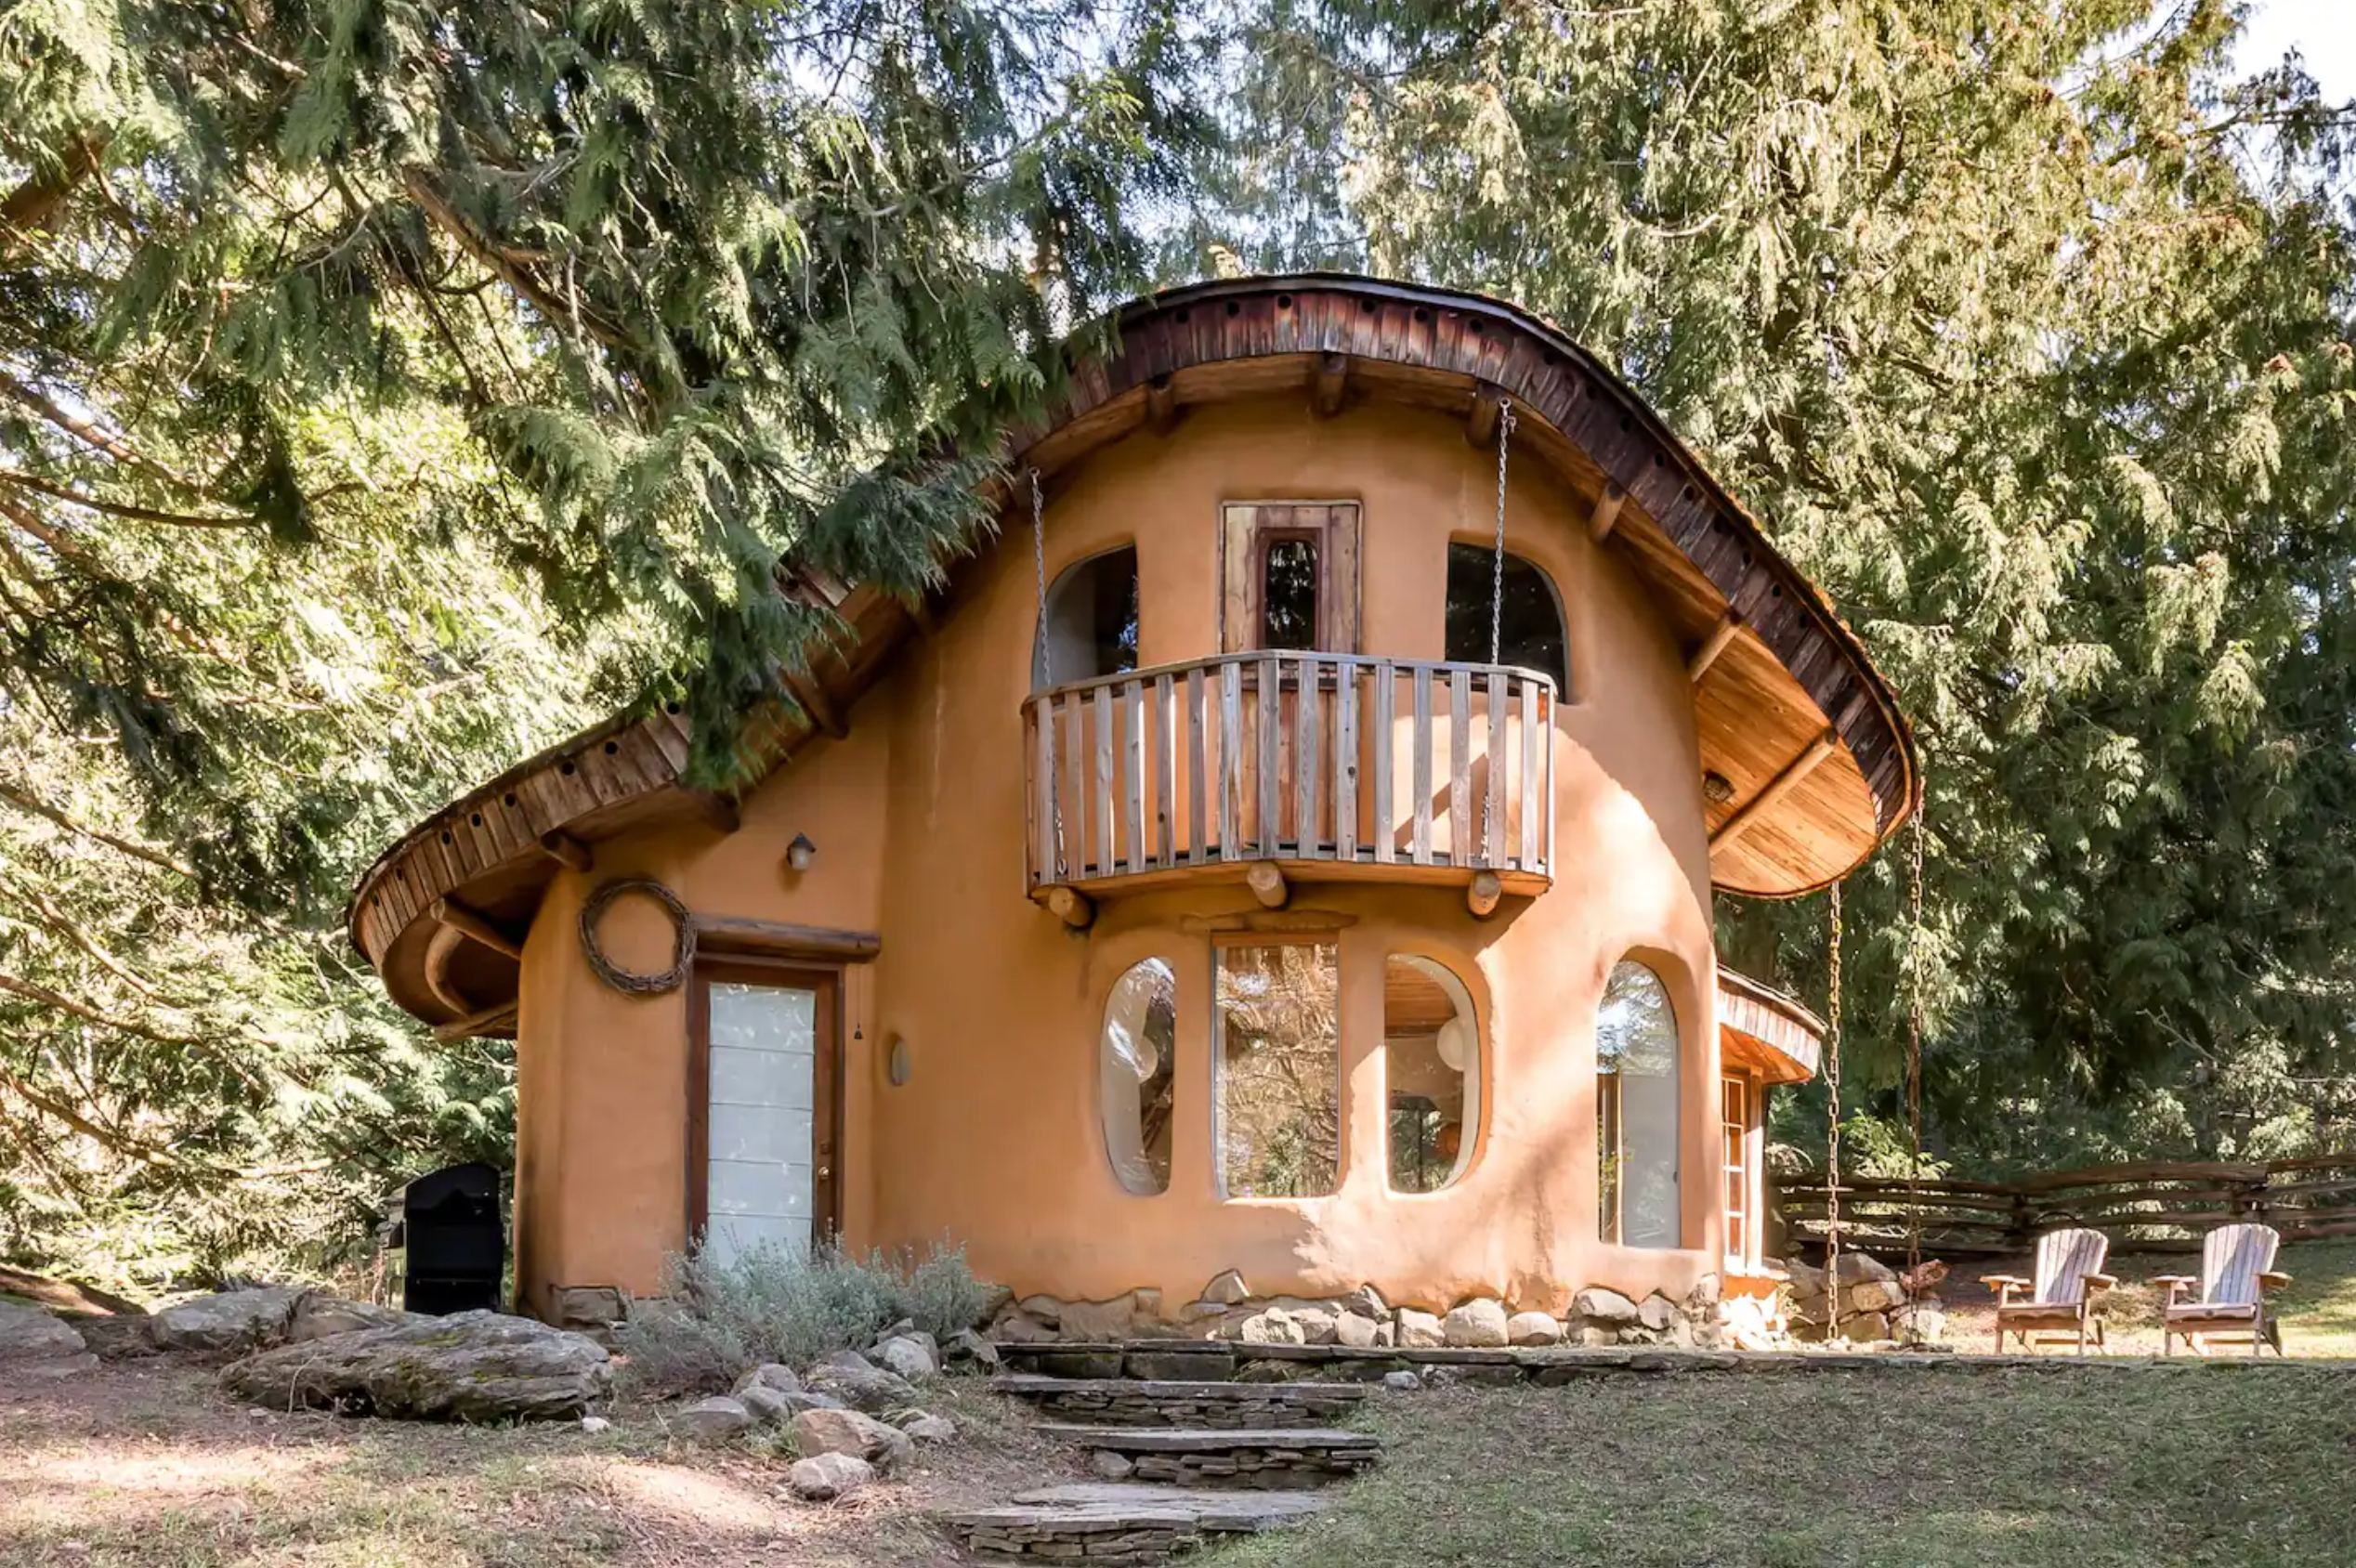 Here’s the thing about booking an Airbnb—you can really go all-in on whimsy. This charming earthen home on Mayne Island is a great example of what you can find on the platform: It’s hand-sculpted using local and sustainable natural materials and resembles something you’d imagine <em>Frog and Toad</em> living in. Step inside the one-bedroom and you’ll find a modern cottage with all the creature comforts you could need for a cozy escape, including a full kitchen and dining room. Plus, the hosts live in a neighboring house, so they can easily provide help, advice, or answers to any of your questions. $132, Airbnb (starting price). <a href="https://www.airbnb.com/rooms/1720832">Get it now!</a><p>Sign up to receive the latest news, expert tips, and inspiration on all things travel</p><a href="https://www.cntraveler.com/newsletter/the-daily?sourceCode=msnsend">Inspire Me</a>